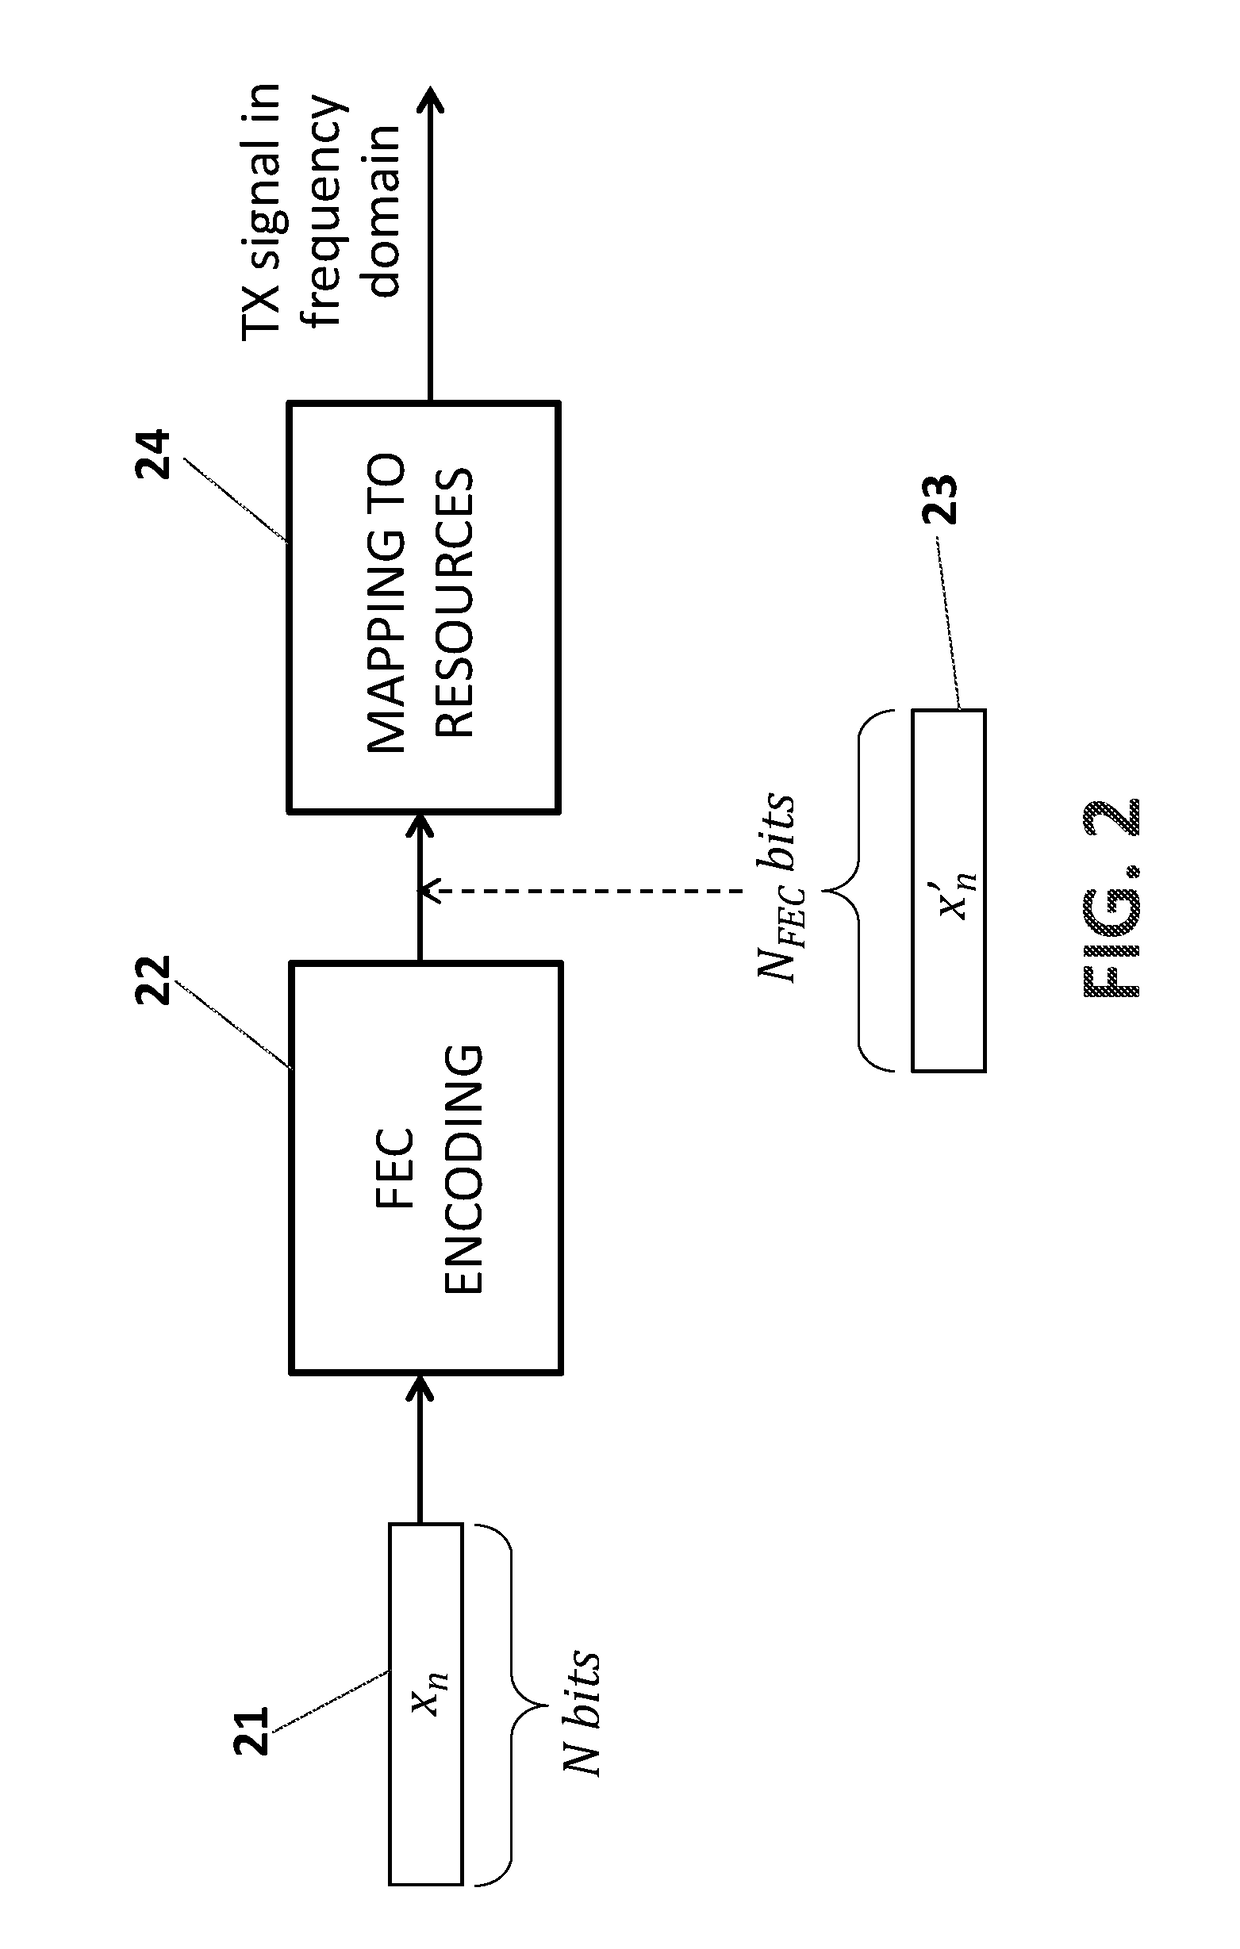 Method, system and device for error detection in OFDM wireless communication networks without full forward error correction decoding